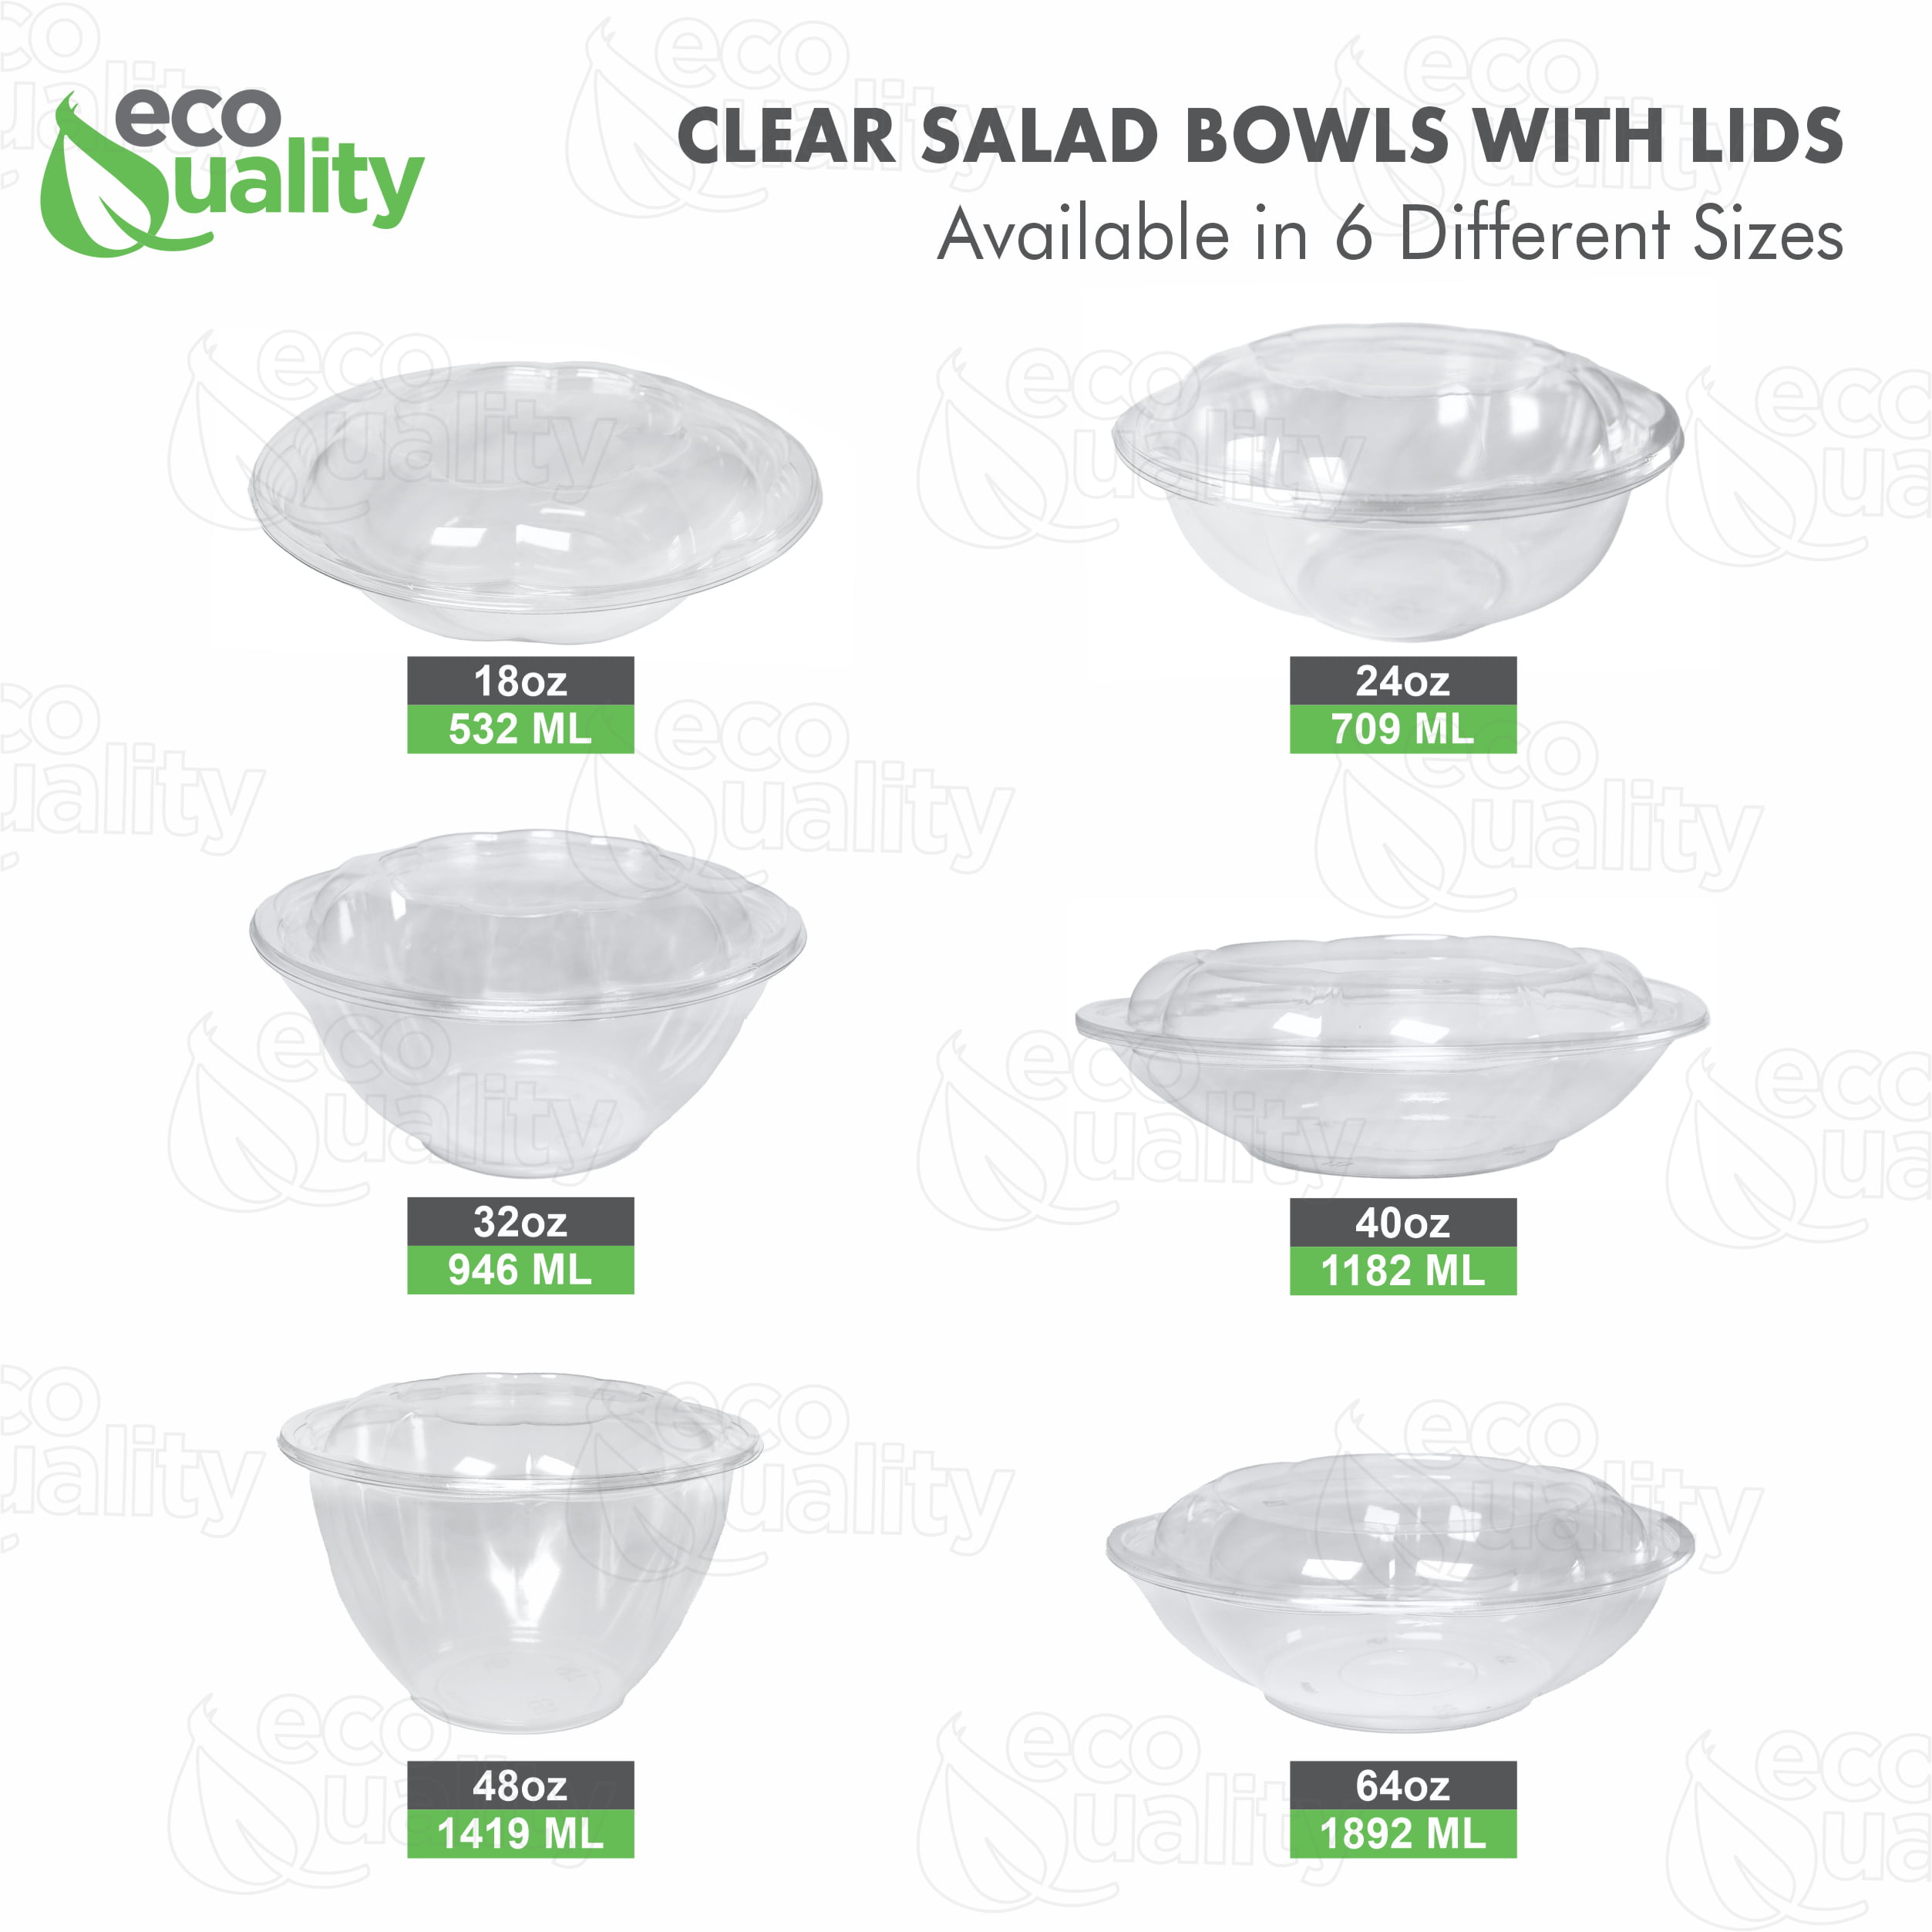 S'well Stainless Steel Salad Bowl Kit - 64oz, Azurite - Comes with 2oz  Condiment Container and Removable Tray for Organization - Leak-Proof, Easy  to